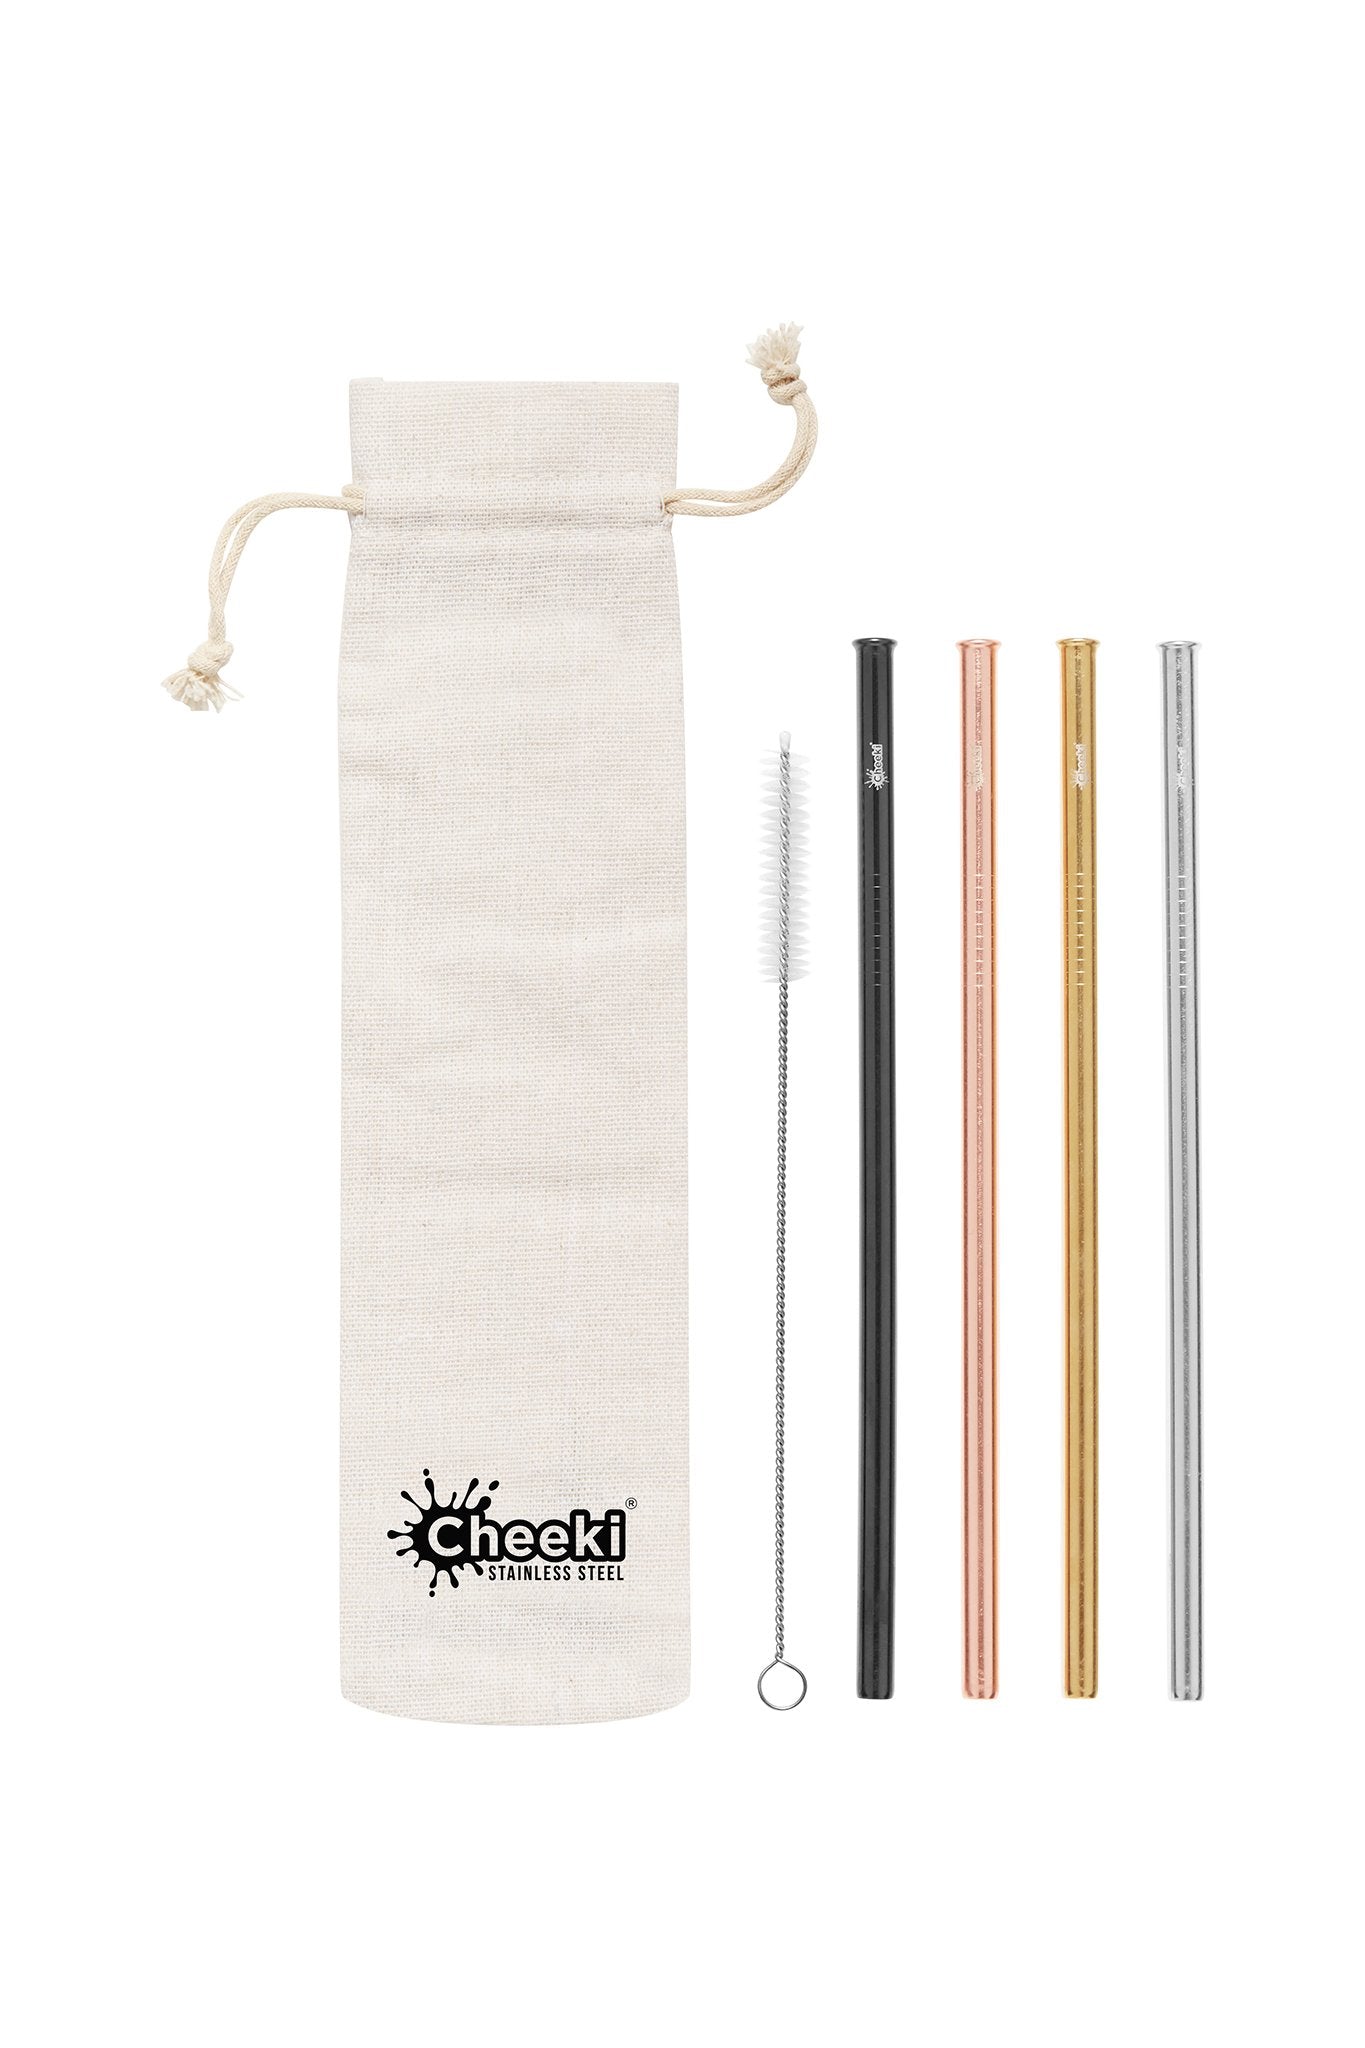 Straight Stainless Steel Straws - Silver, Gold, Rose Gold, Black, Cleaning Brush + Bag 4 Pack